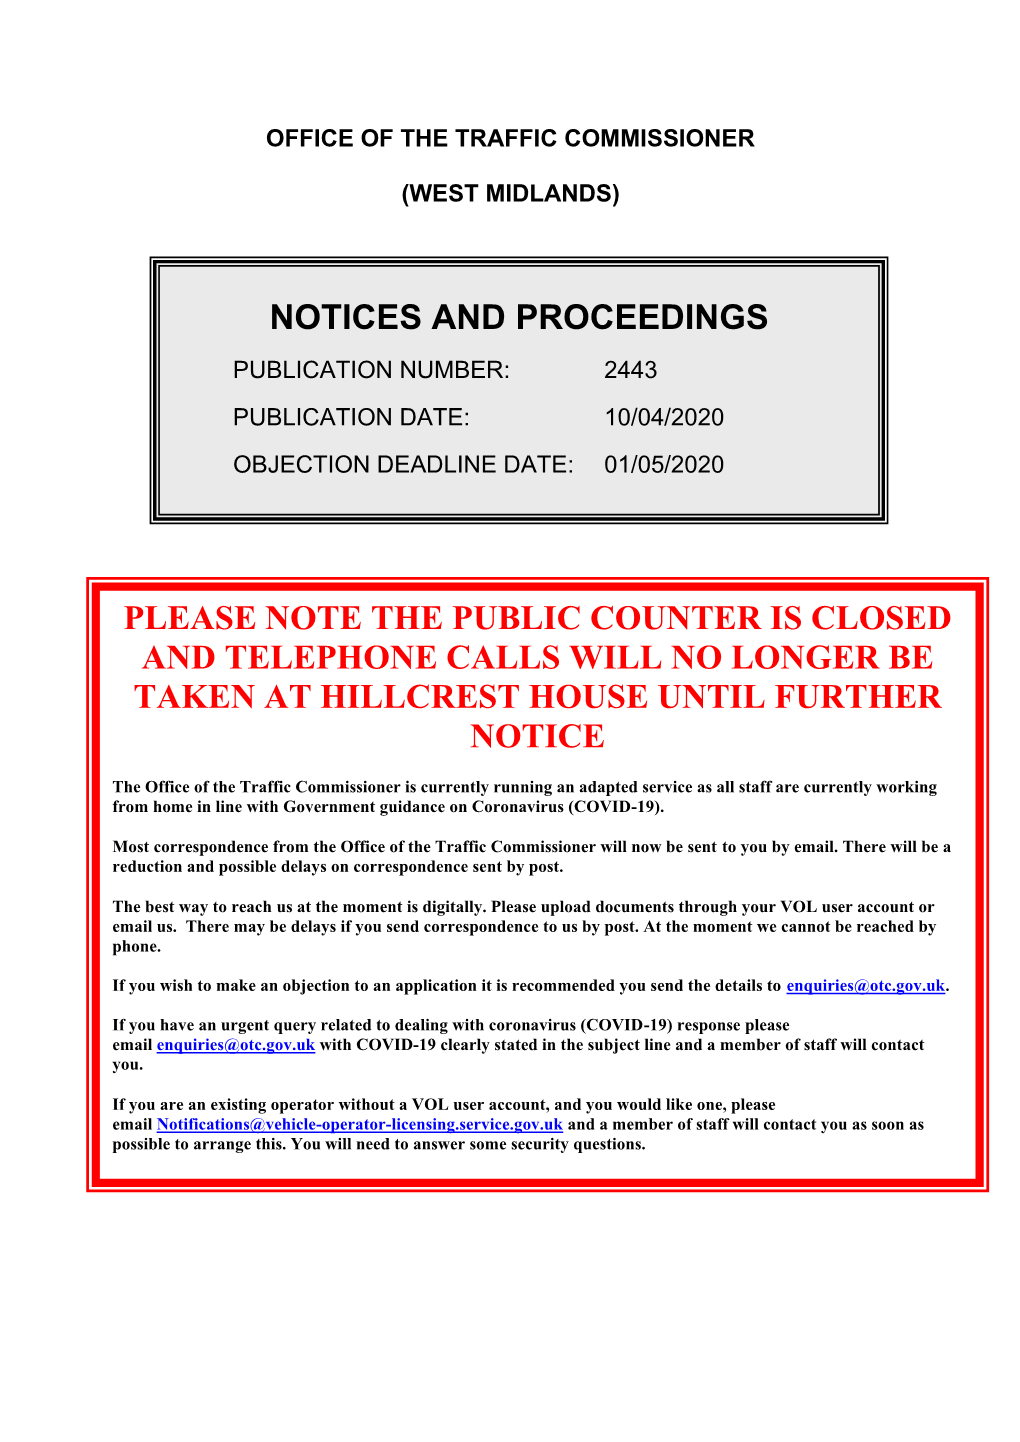 Notices and Proceedings for the West Midlands